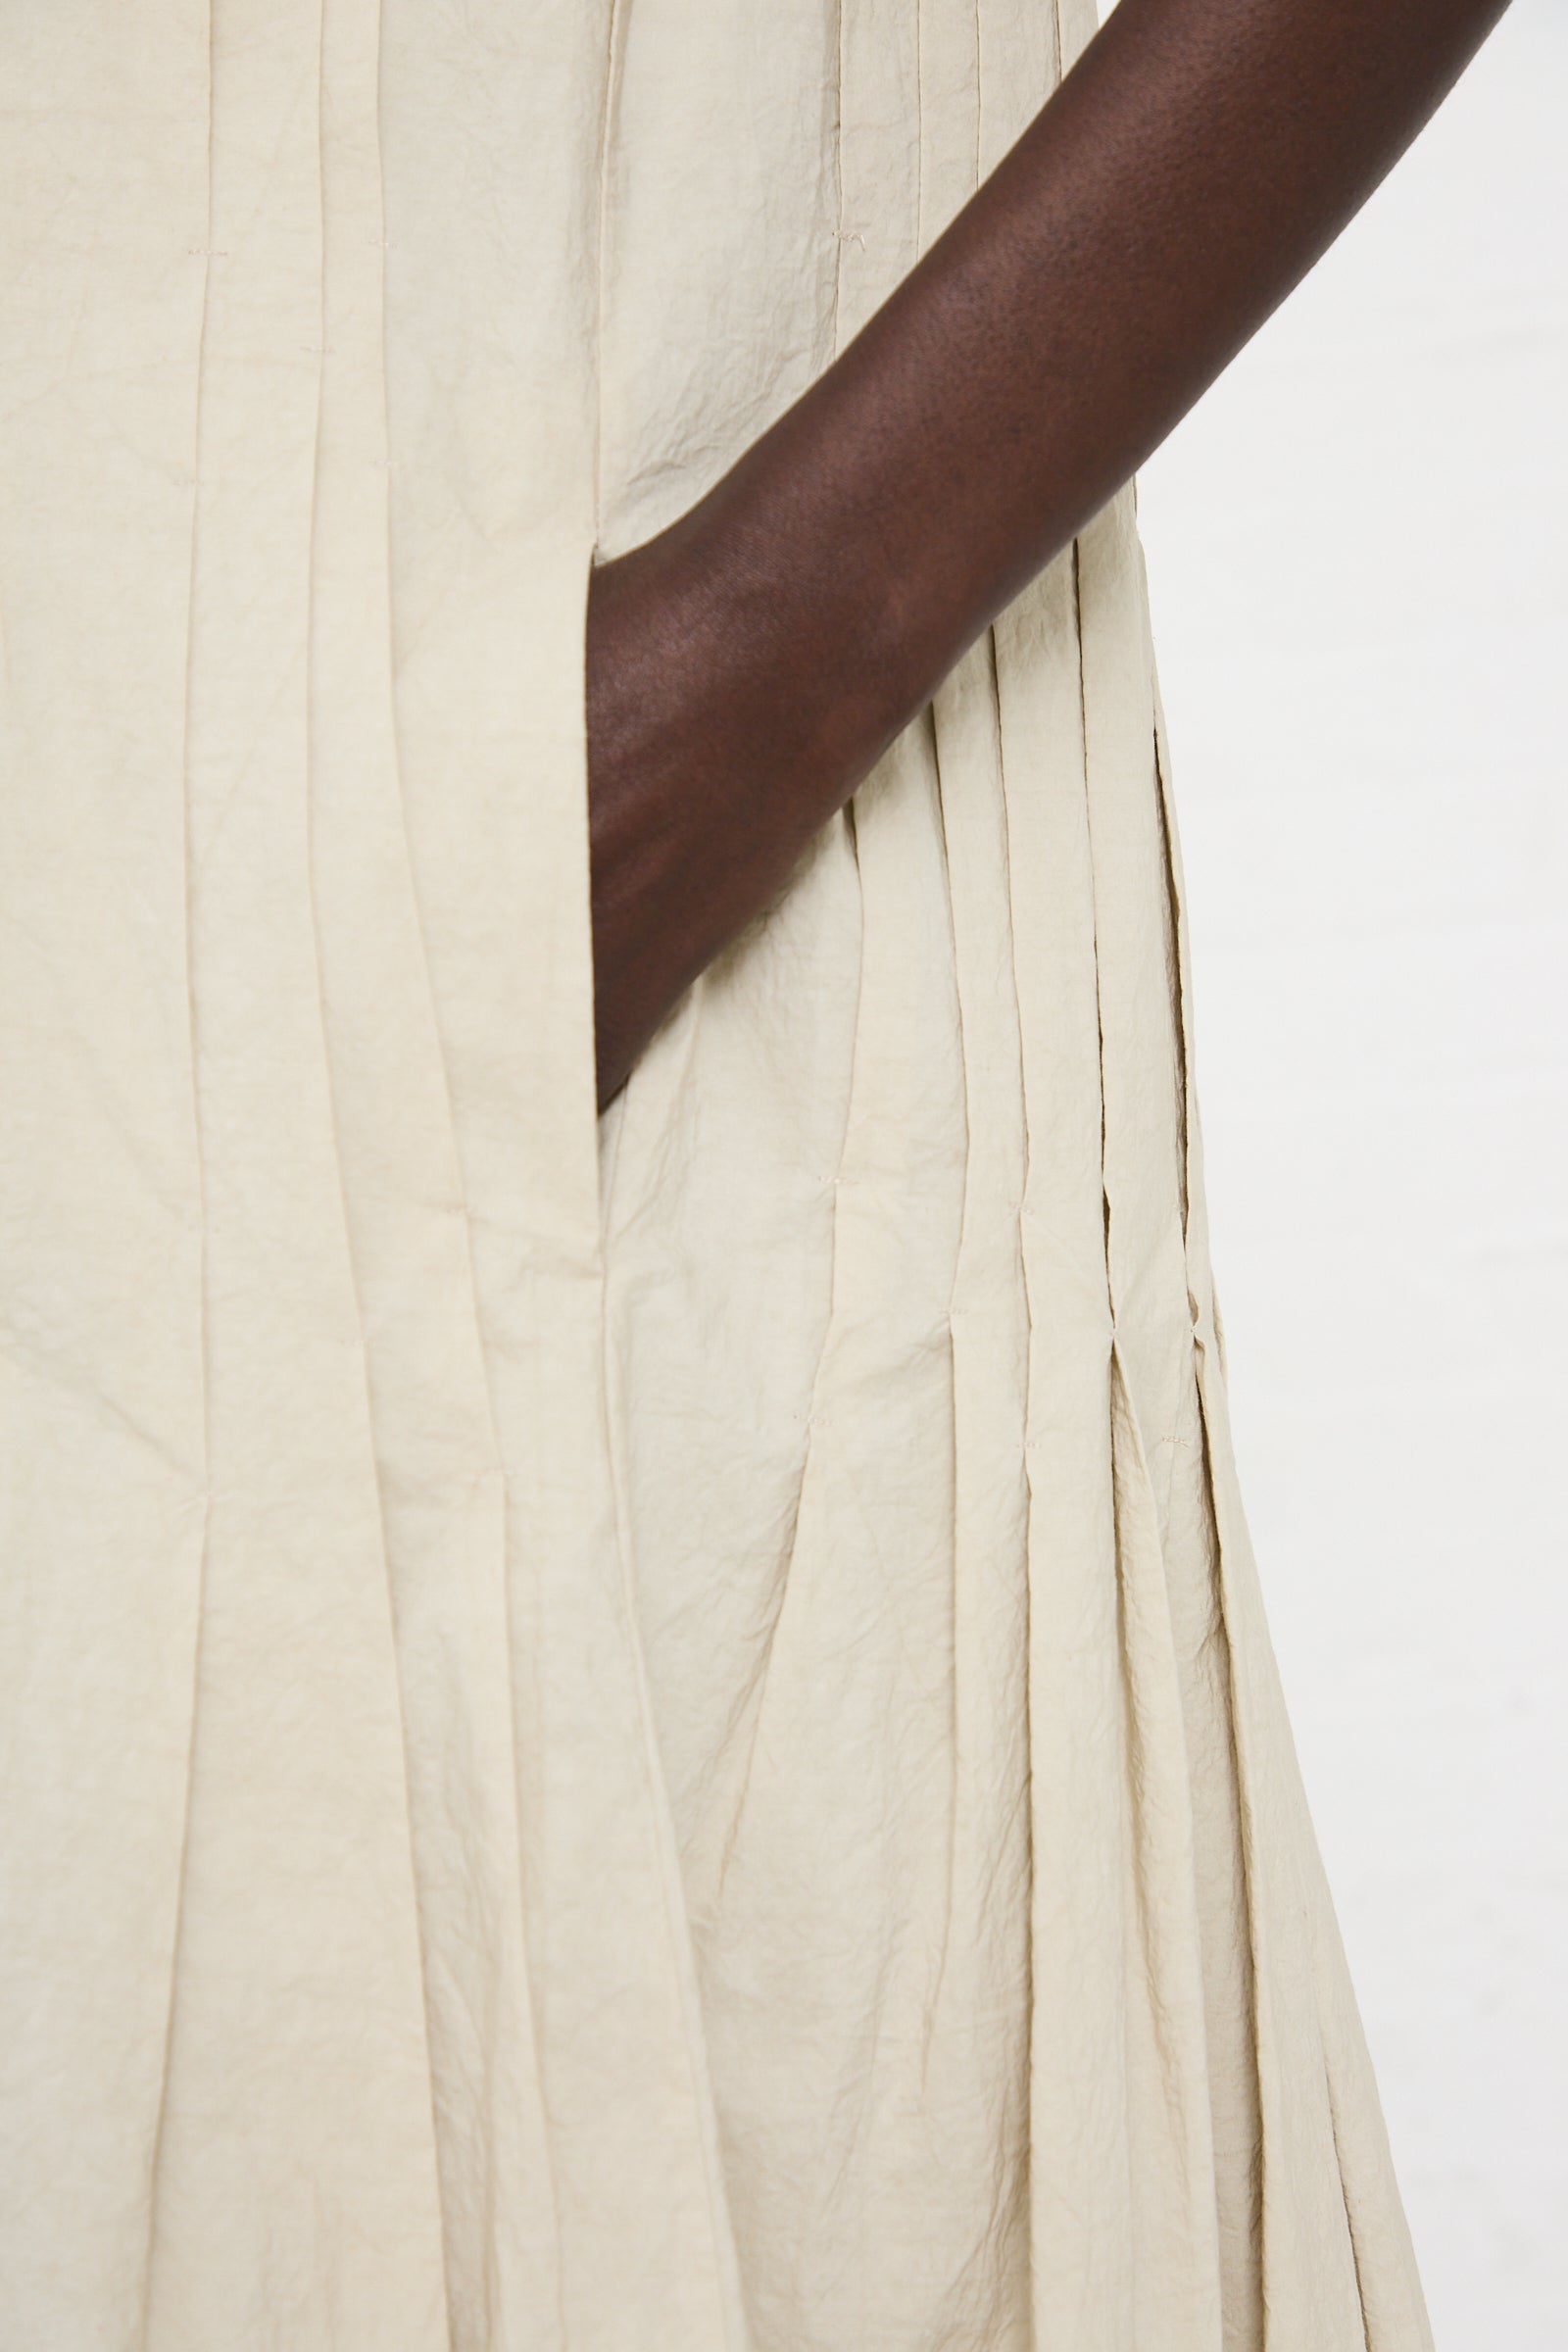 Close-up of a person with a dark complexion wearing a light beige Hand Pleat Dress in Greige by Lauren Manoogian, showing their hand casually placed in a pocket.